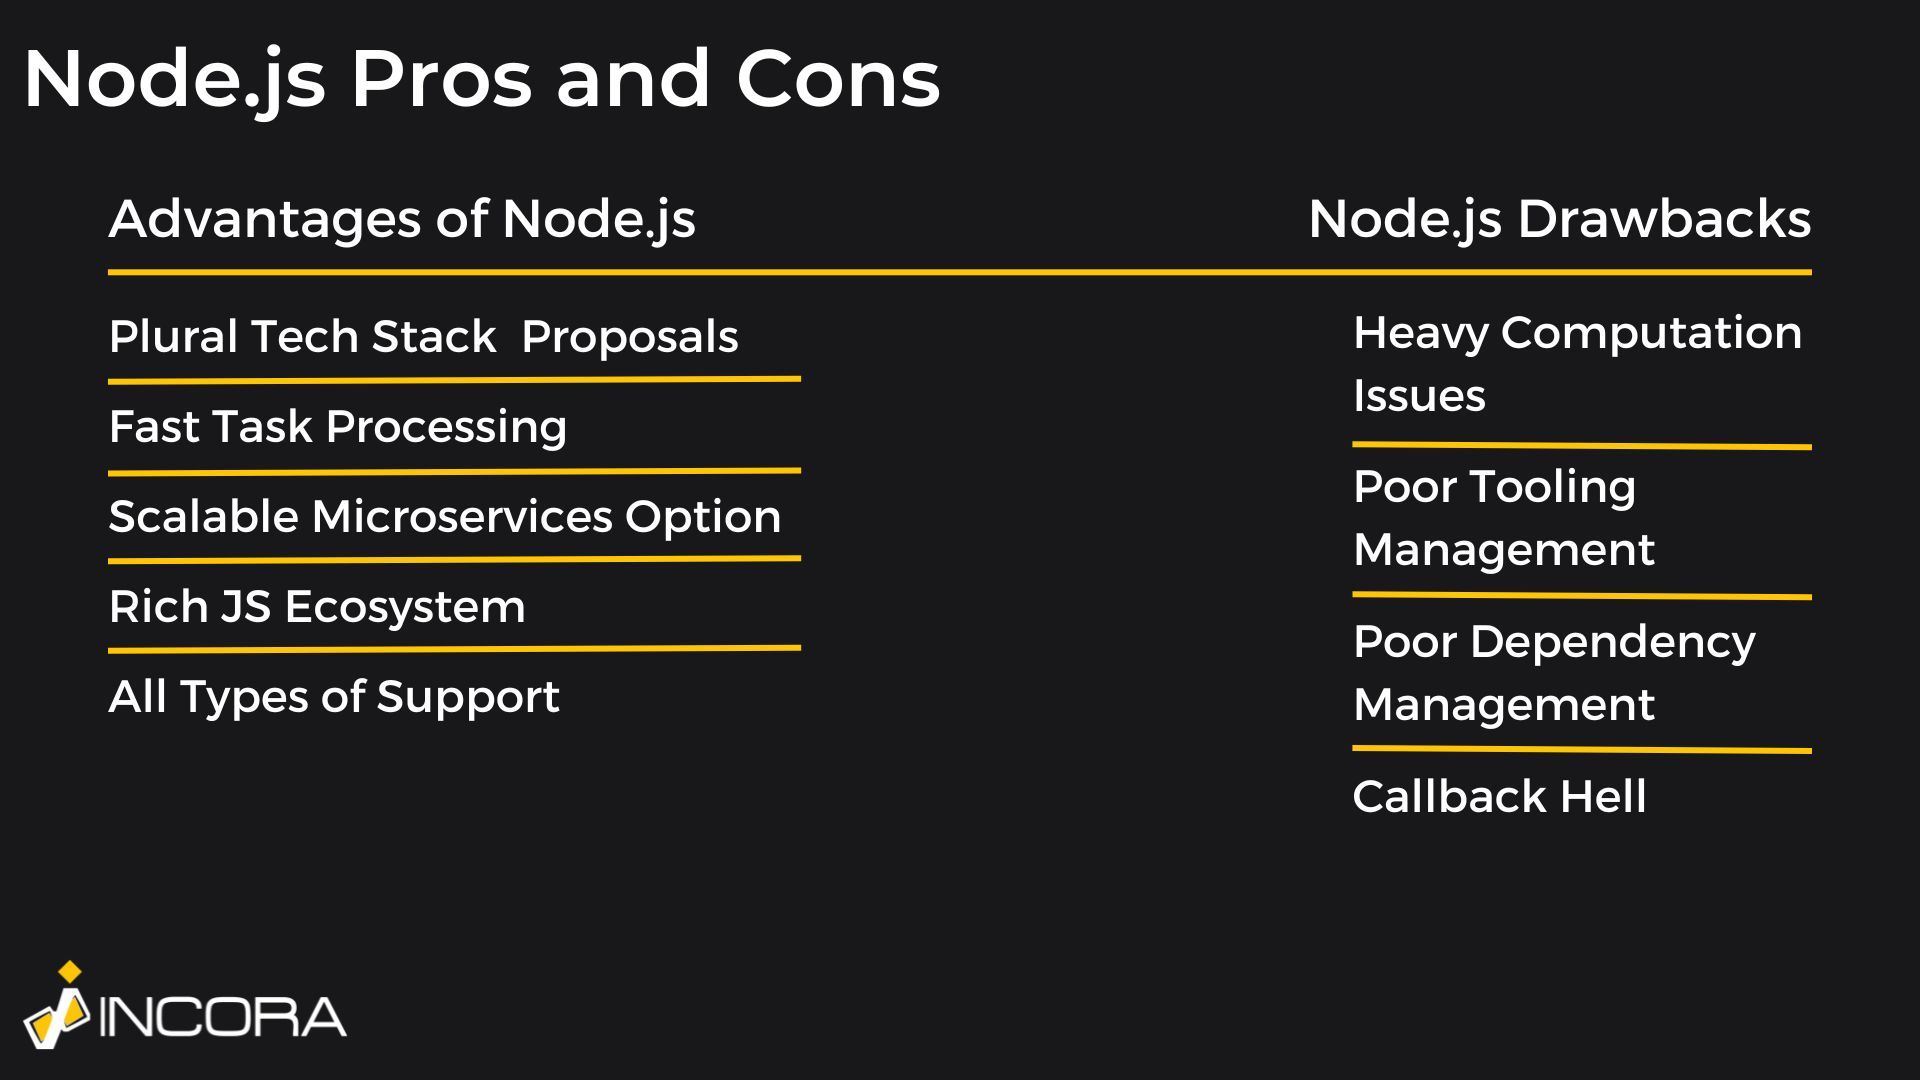 Node.js pros and cons (1).jpg